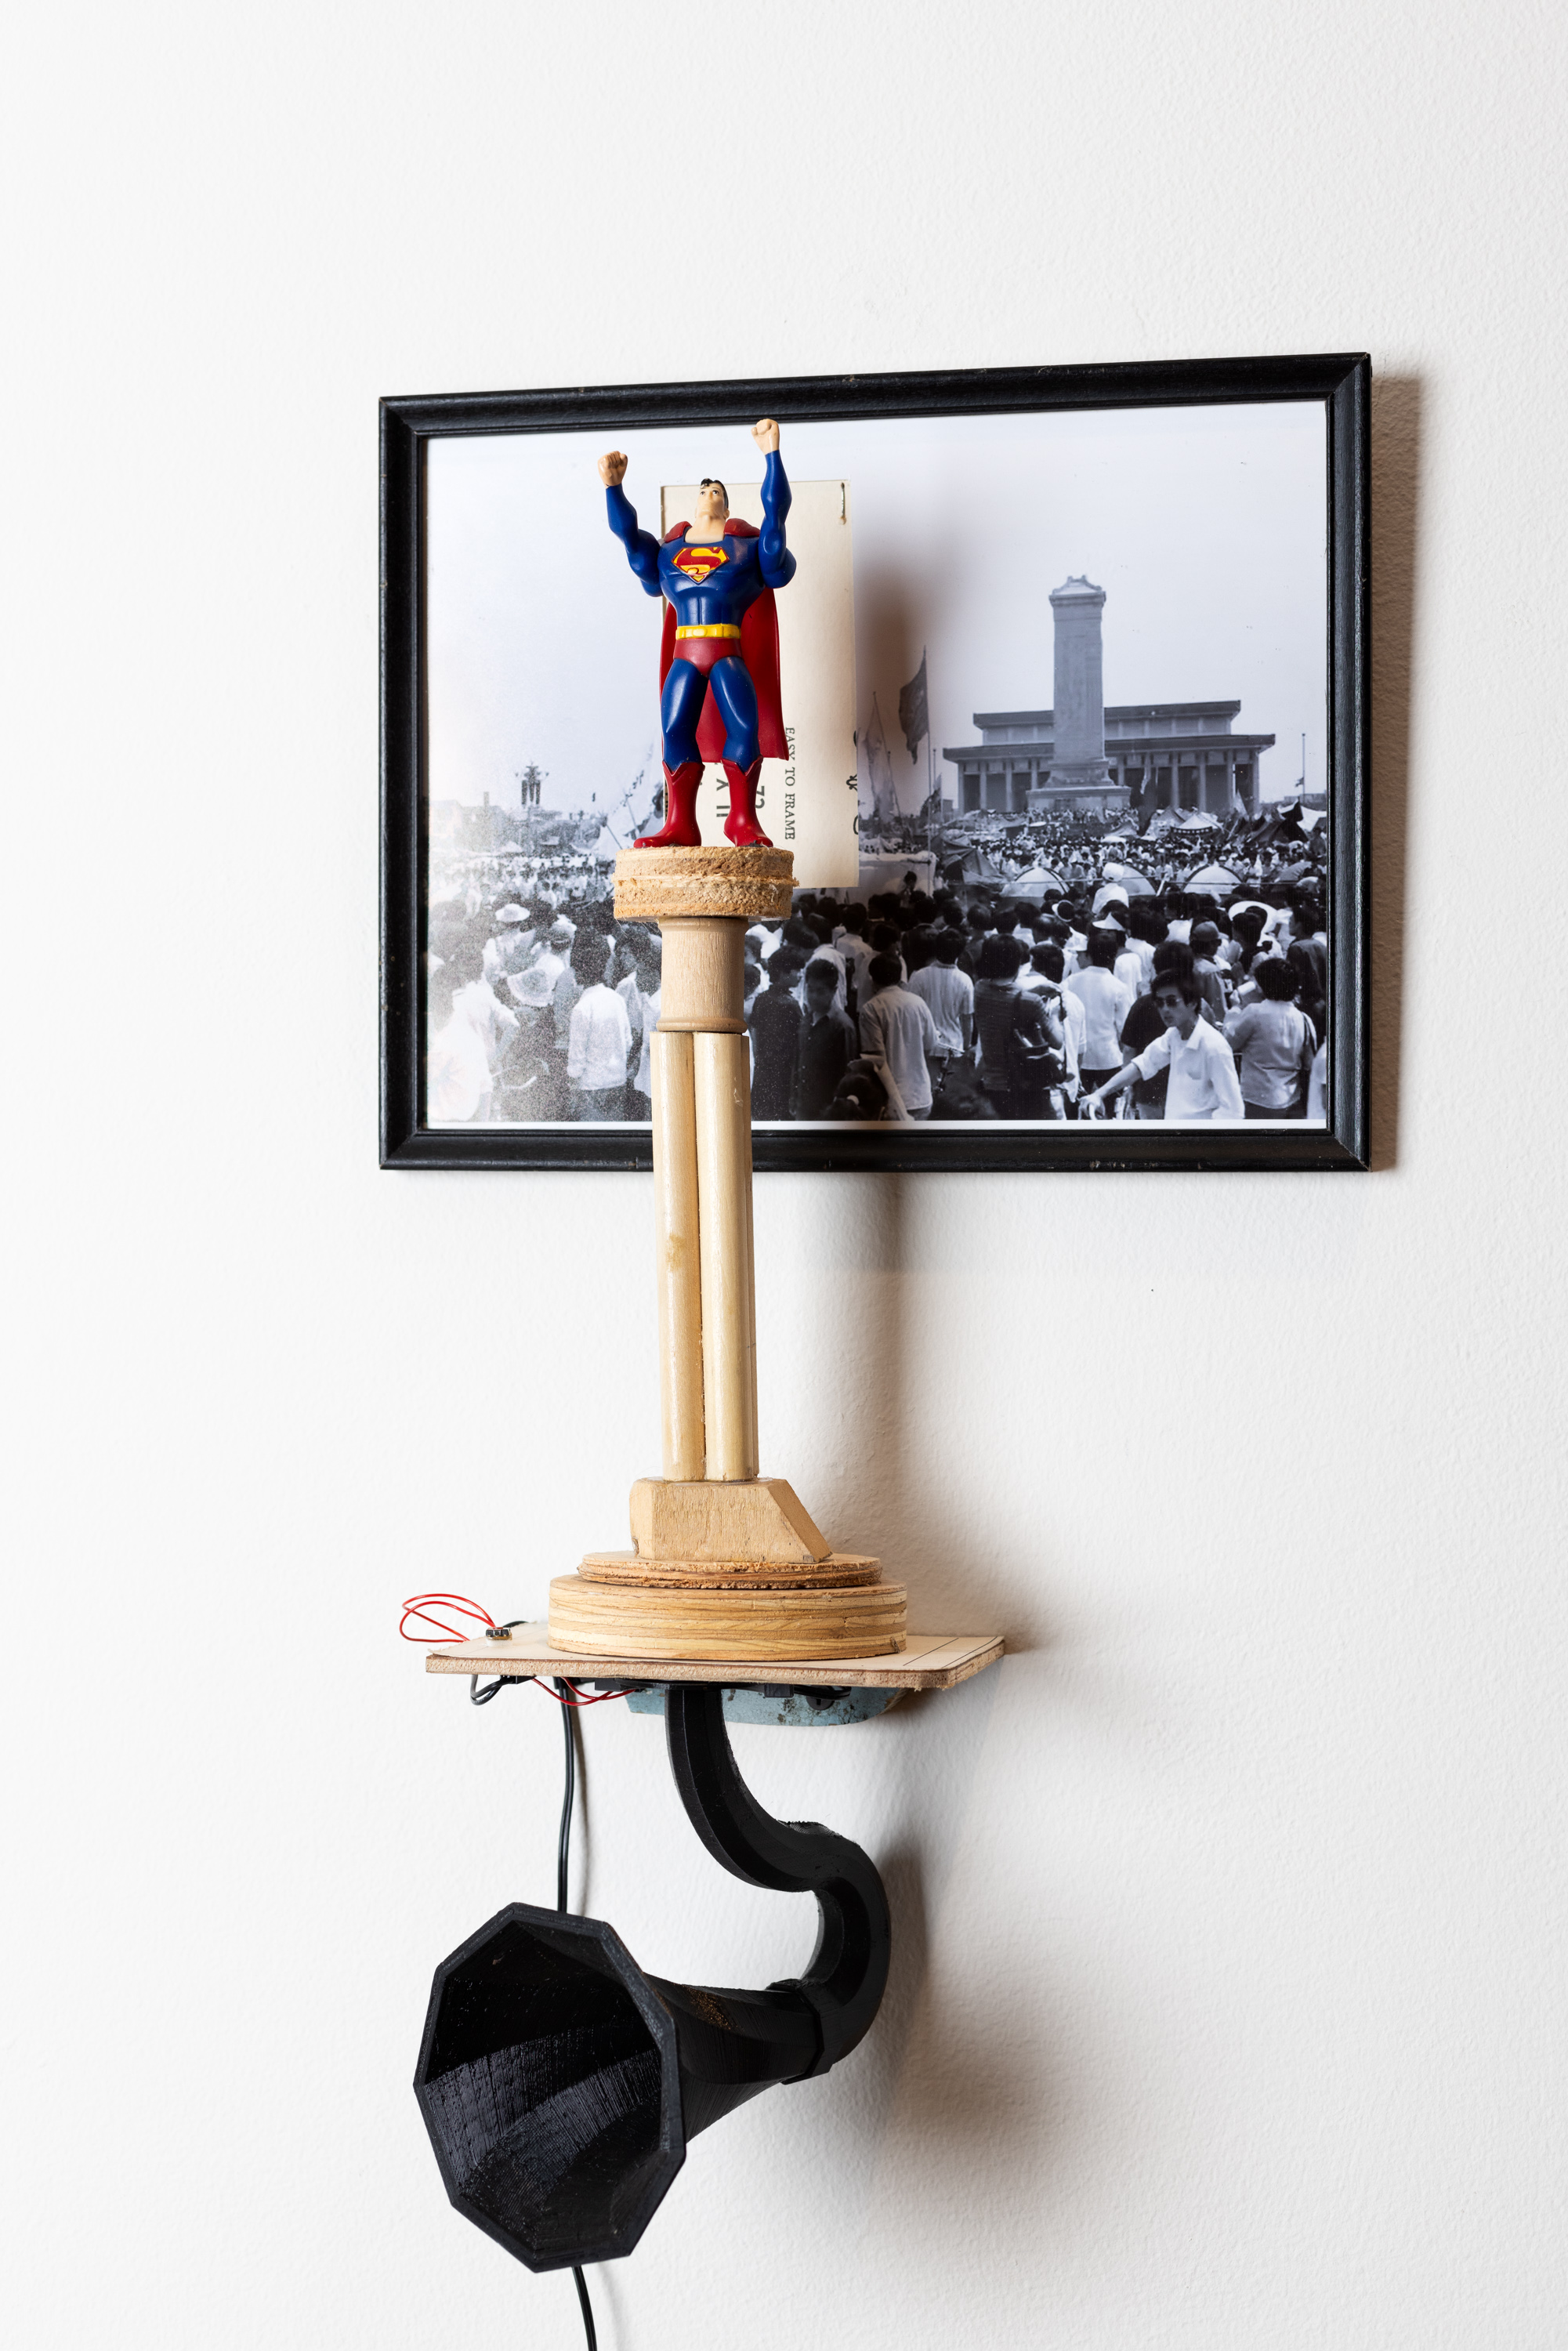 Color image of a mixed media artwork with a framed black and white photograph along with a small plastic superman figure on a wooden pedestal with a small gramophone